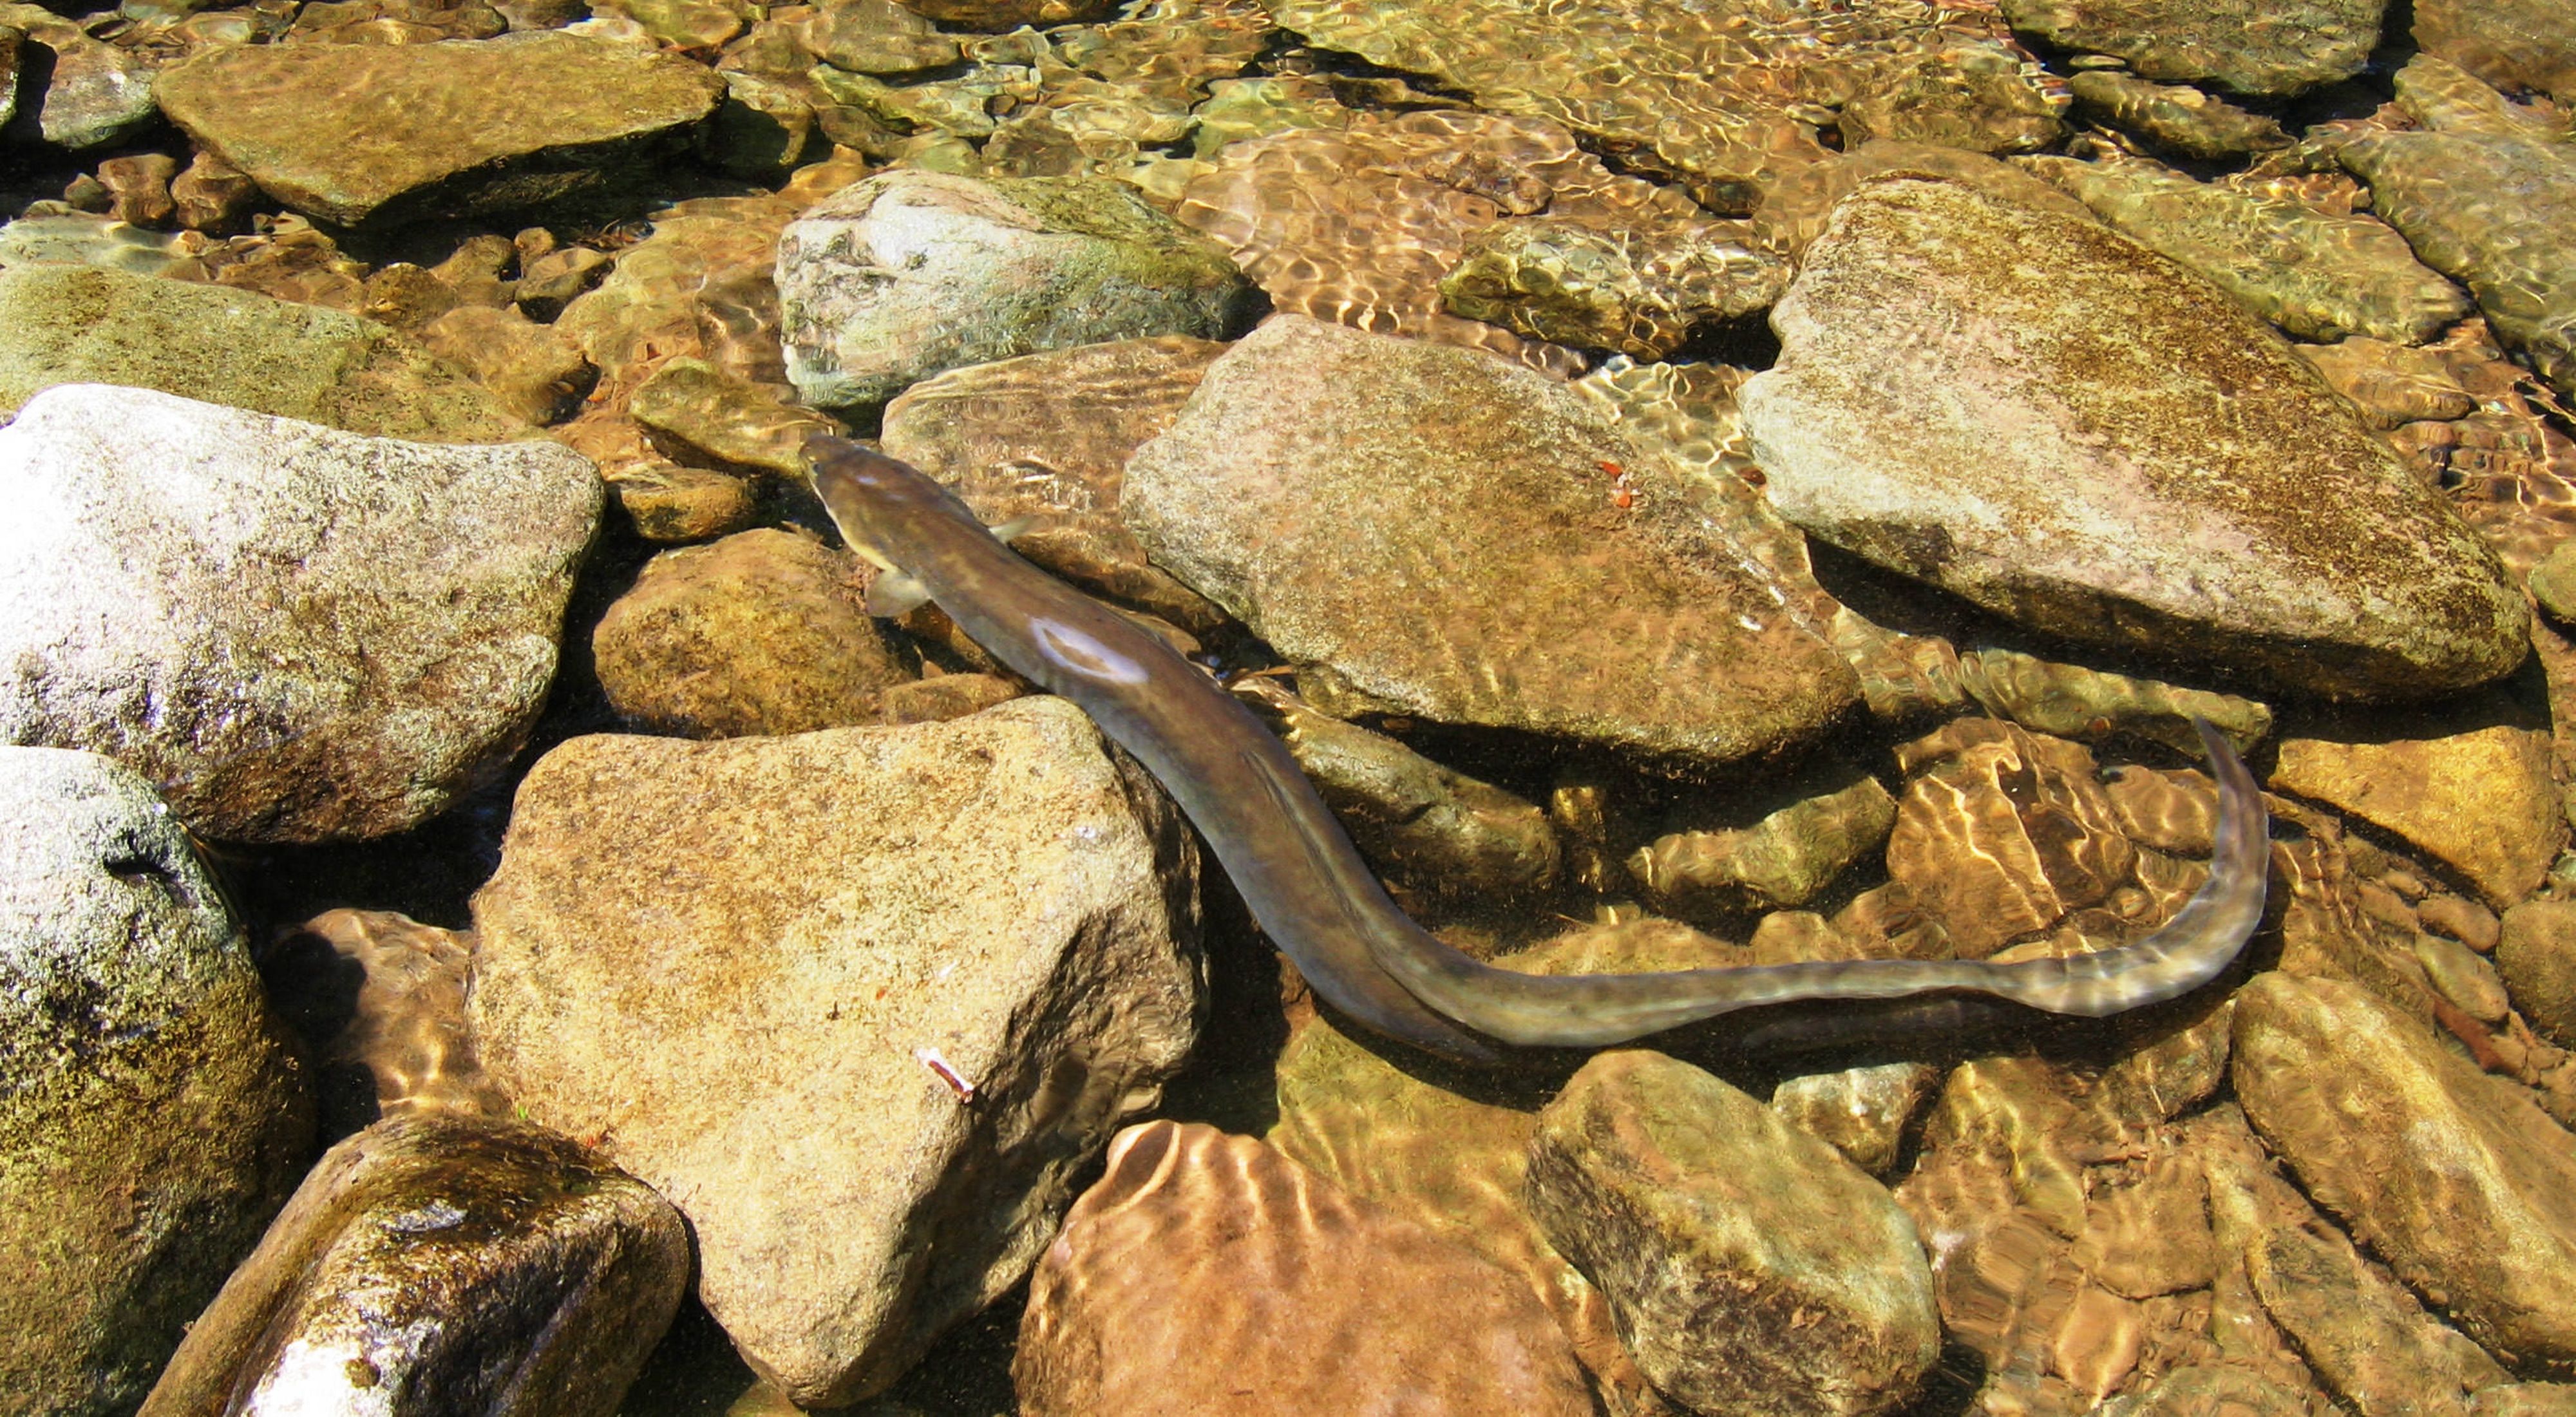 A brown eel rests in a collection of rocks